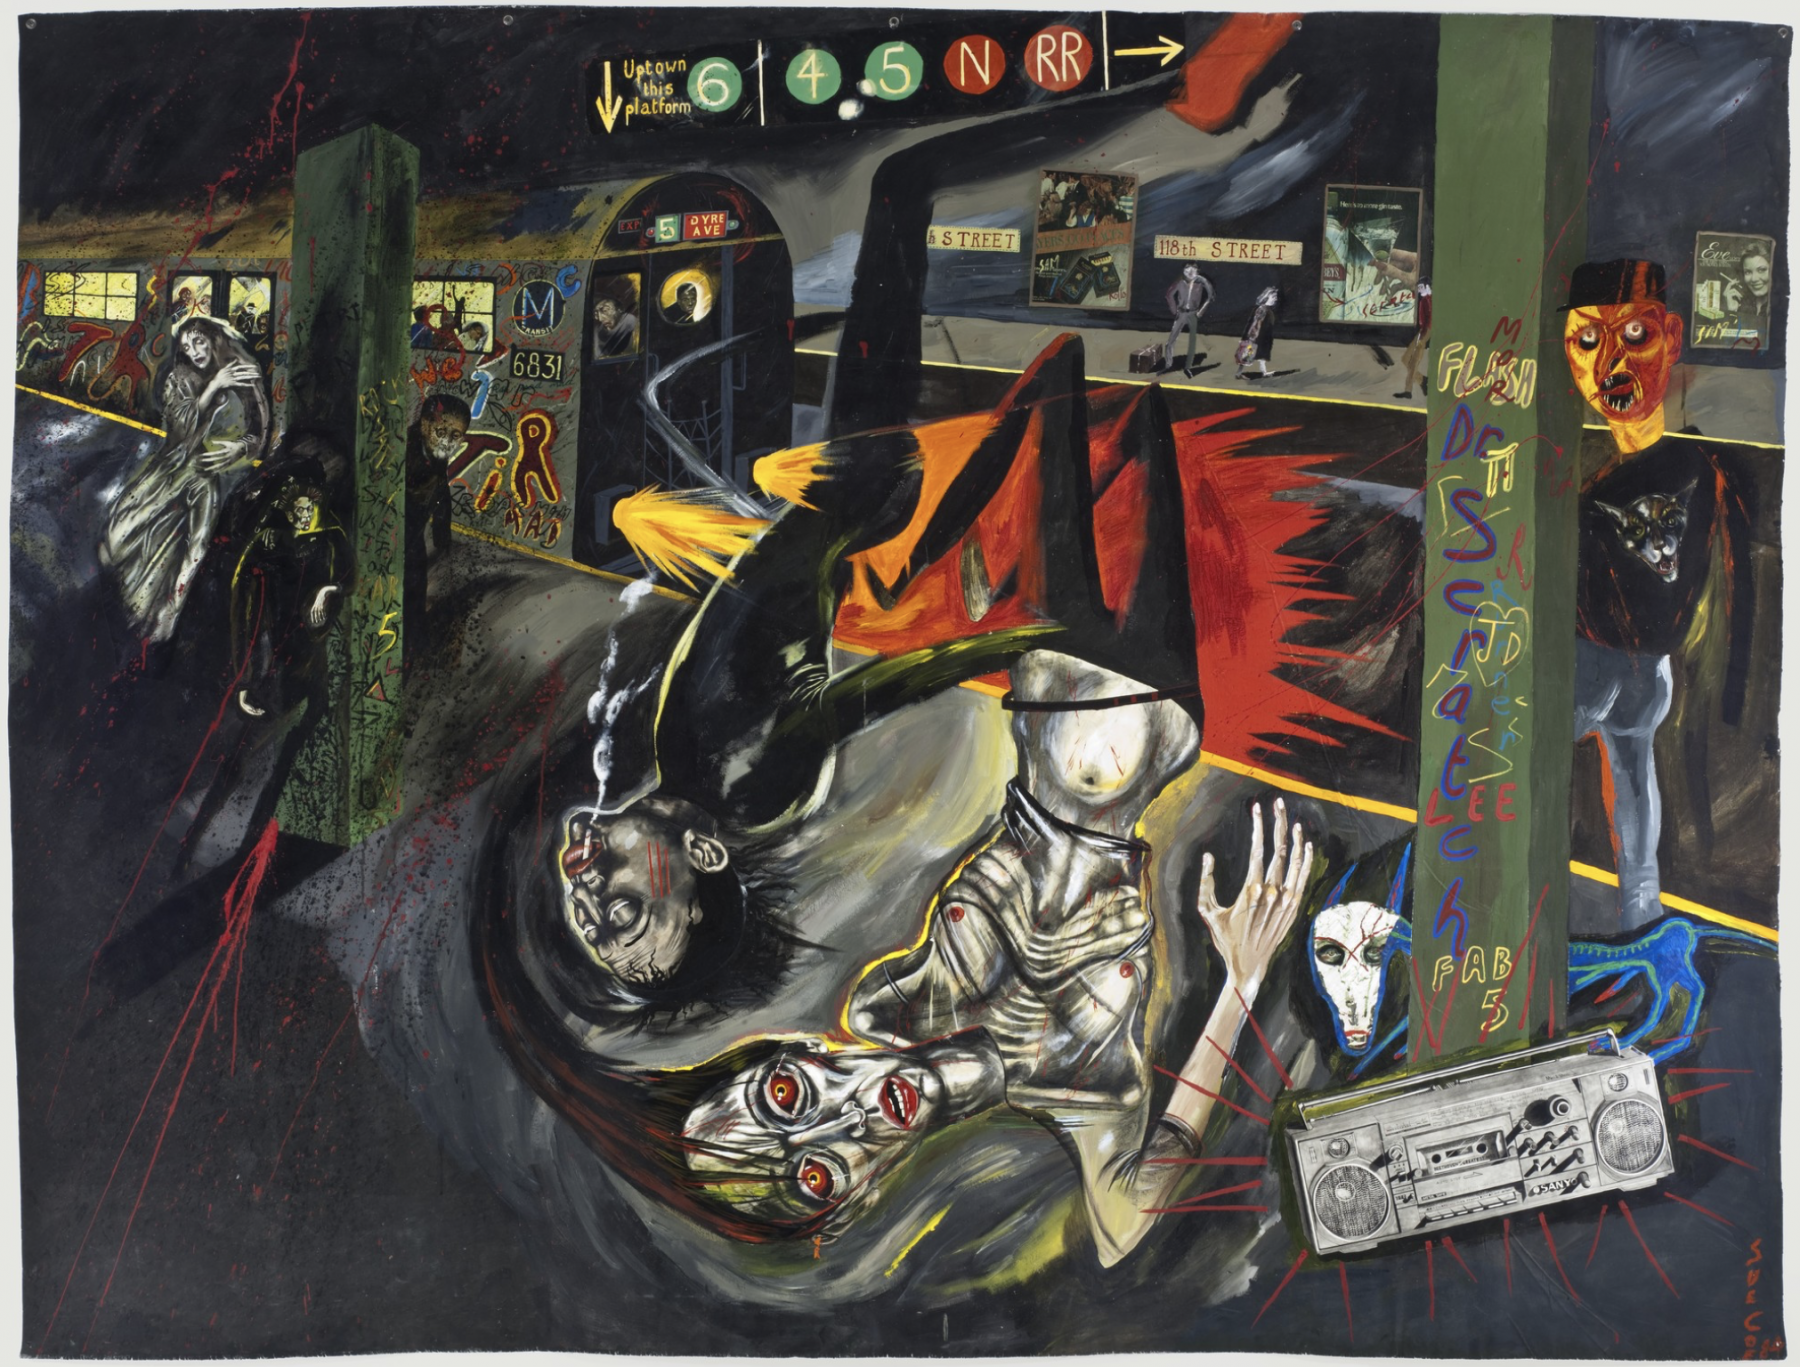 Sue Coe, Breaking, 1984,&nbsp;Mixed media on canvas, 91 x 121 inches
Courtesy of the Museum of Modern Art